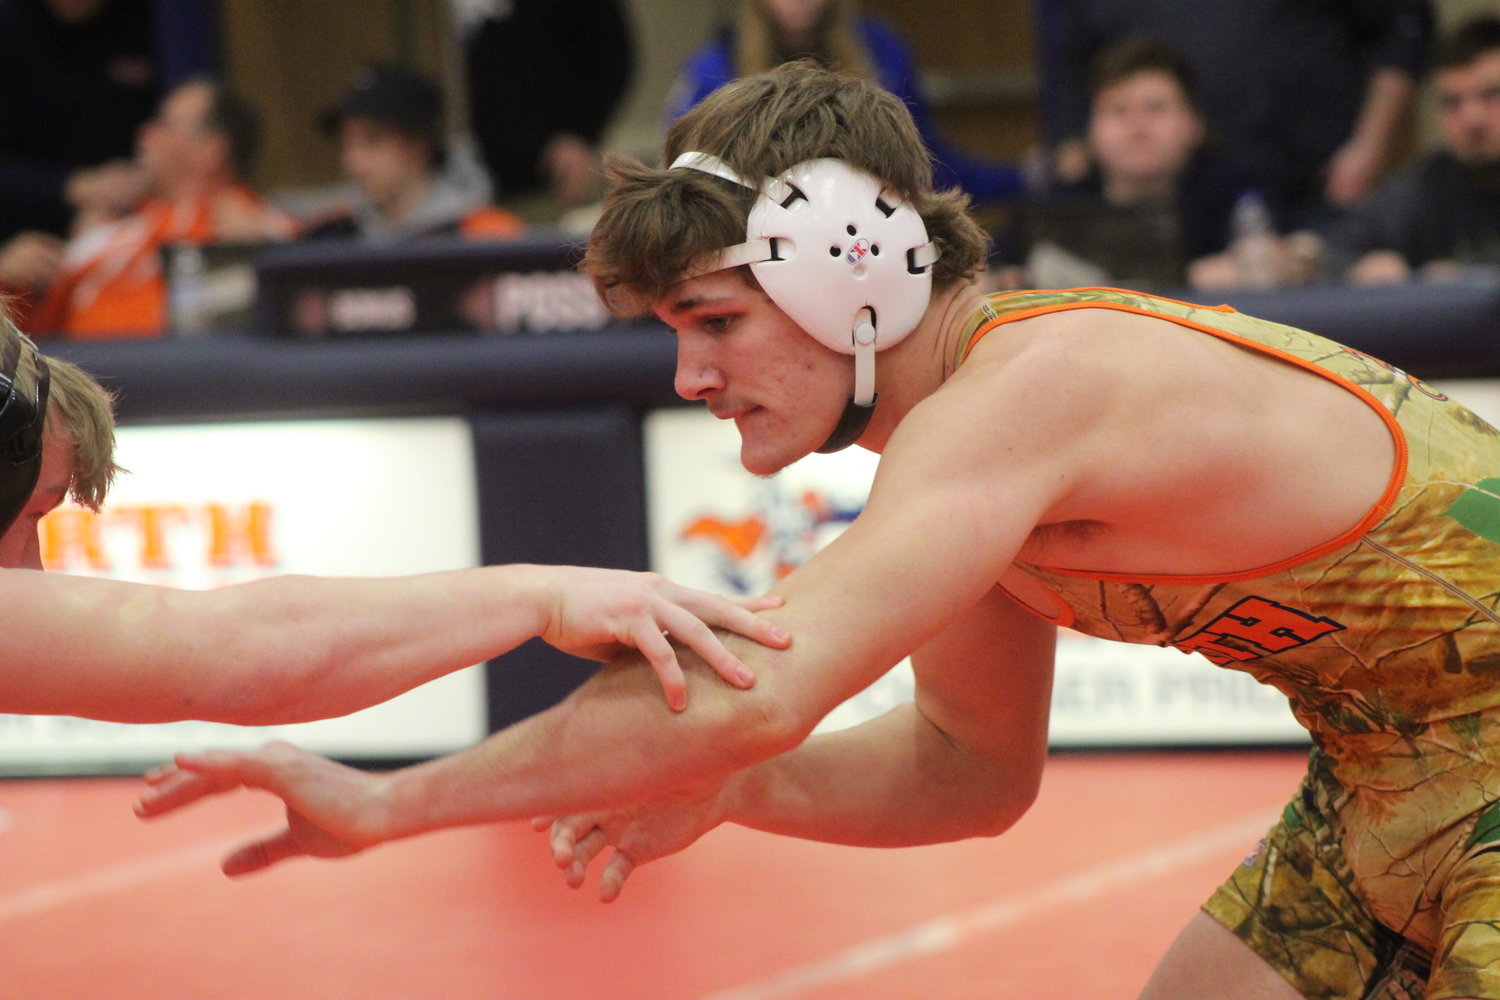 North Montgomery senior Gage Galloway was the runner-up at 160.